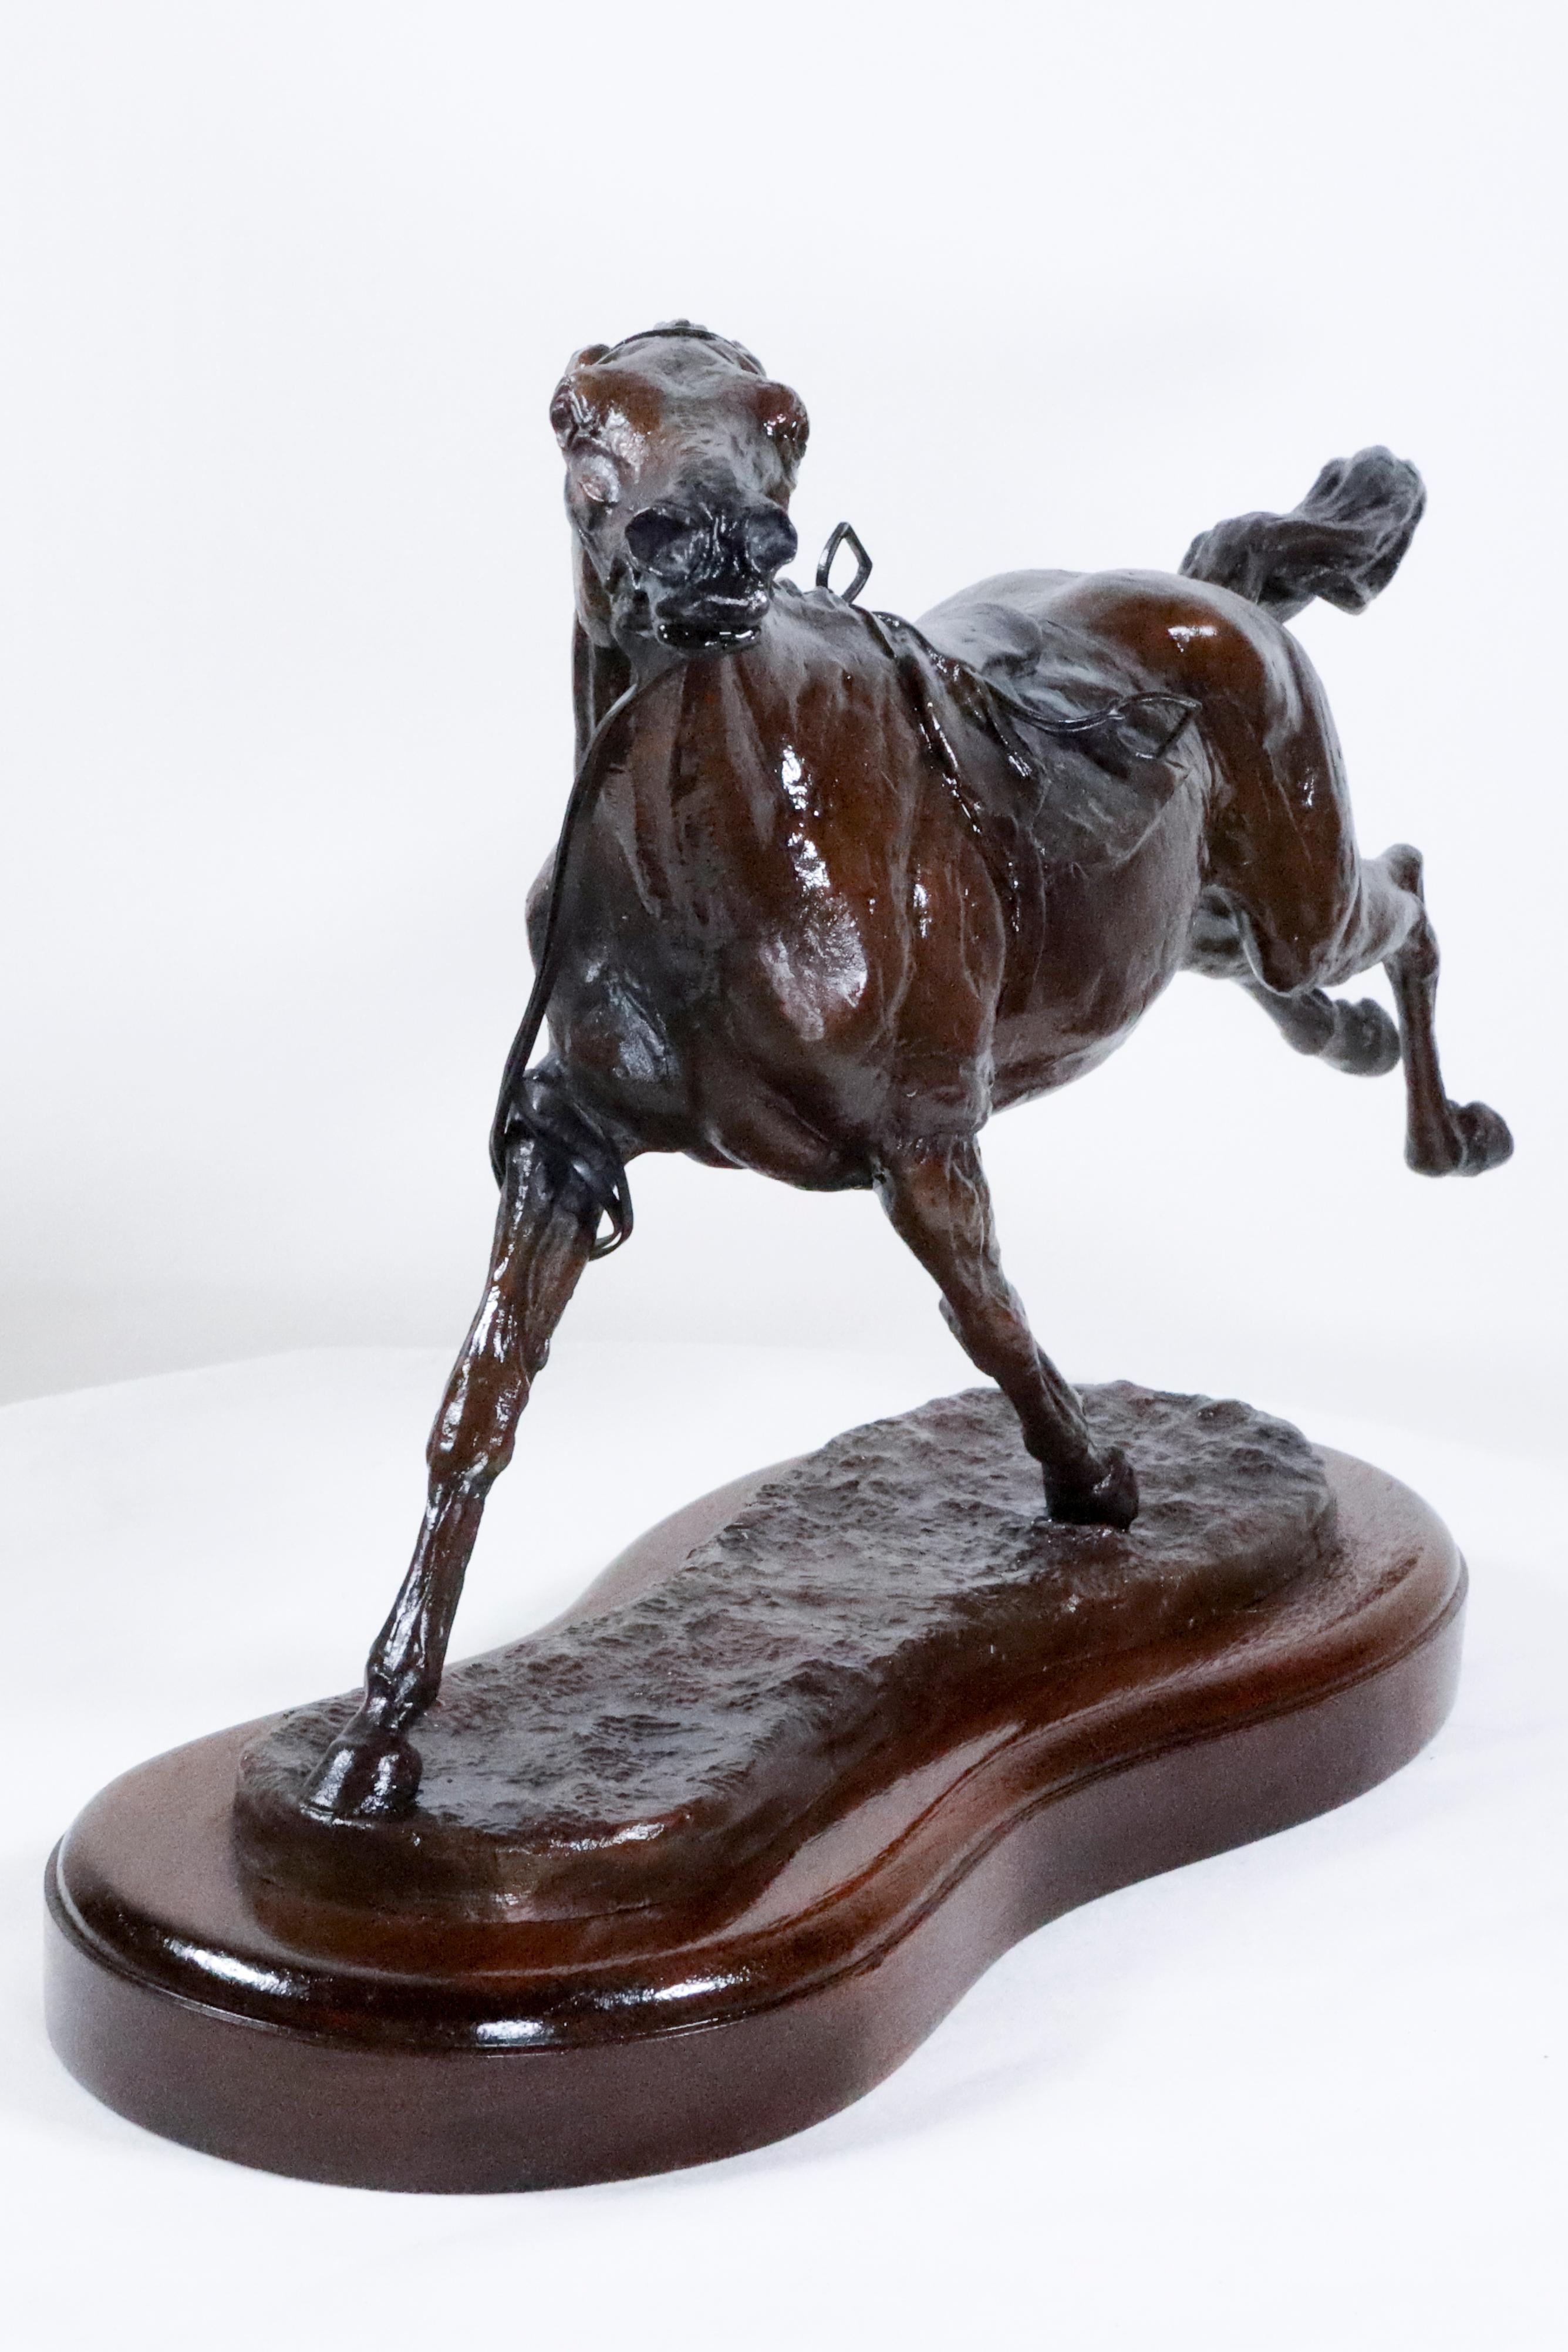 Troublemaker, Bolting Horse without Rider  - American Realist Sculpture by Kathleen Friedenberg